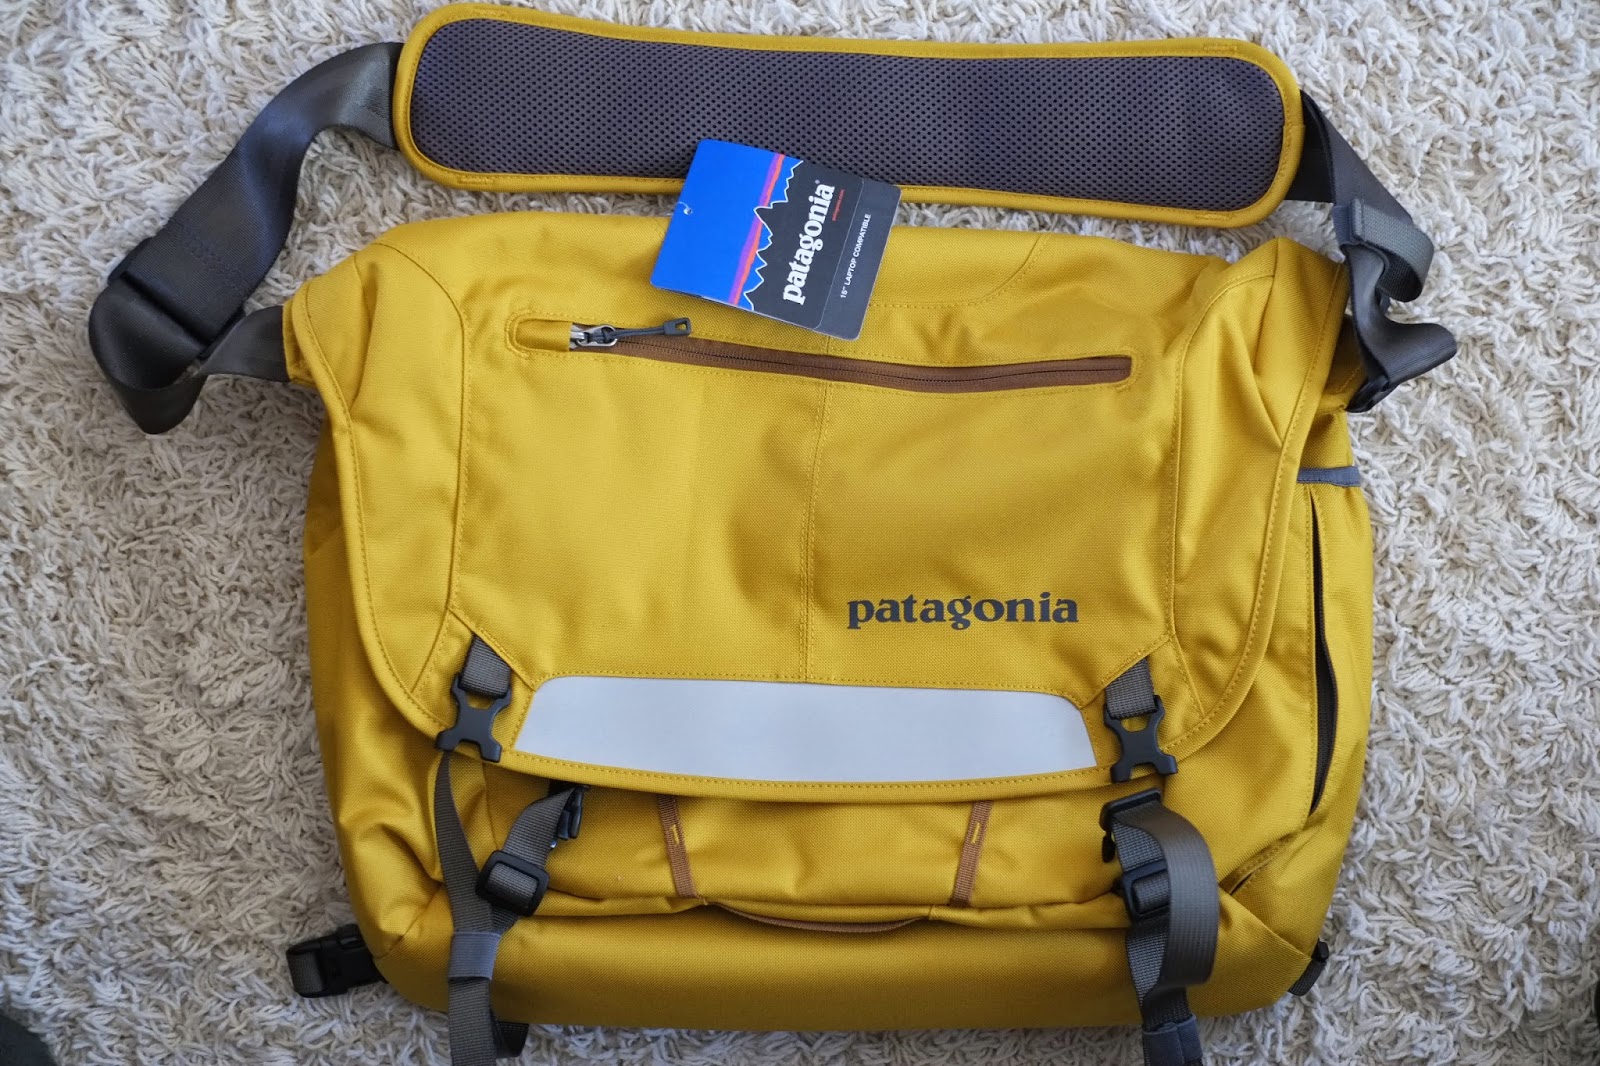 Patagonia Half Mass Messenger Bag Video Review (Features Score: 5.5 ...